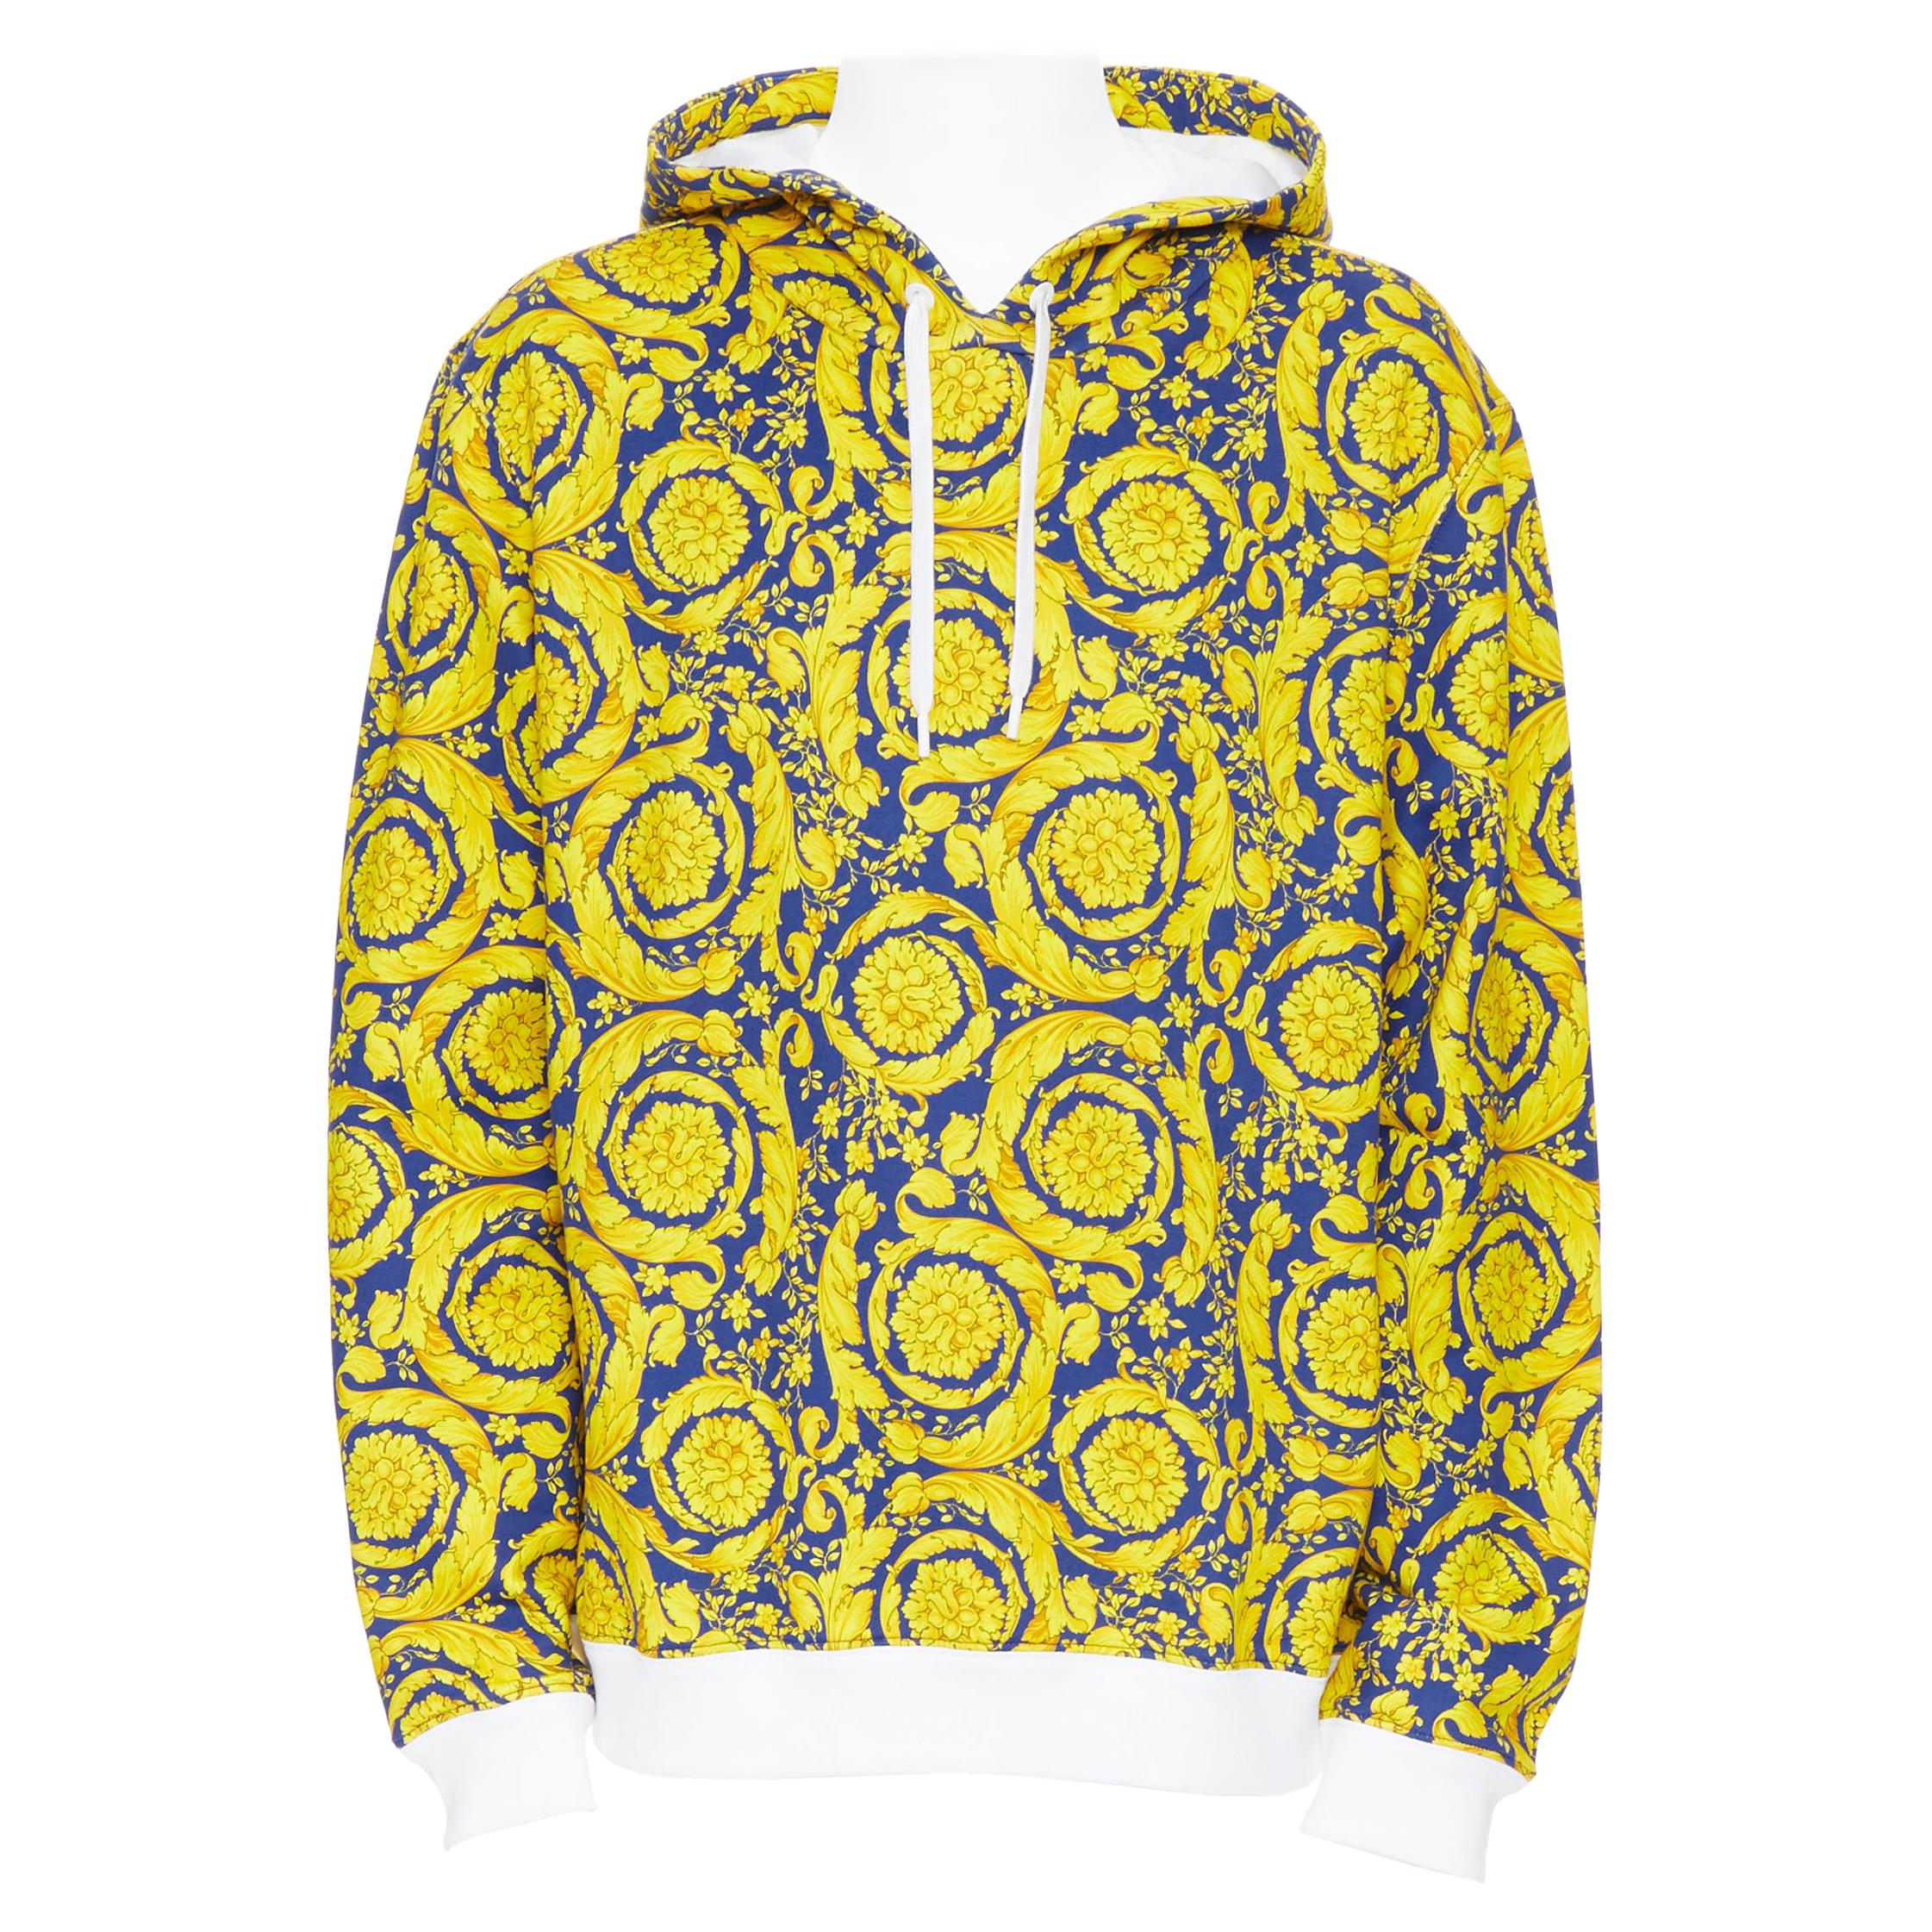 new VERSACE royal blue gold floral baroque print 100% cotton hoodie sweater 3XL